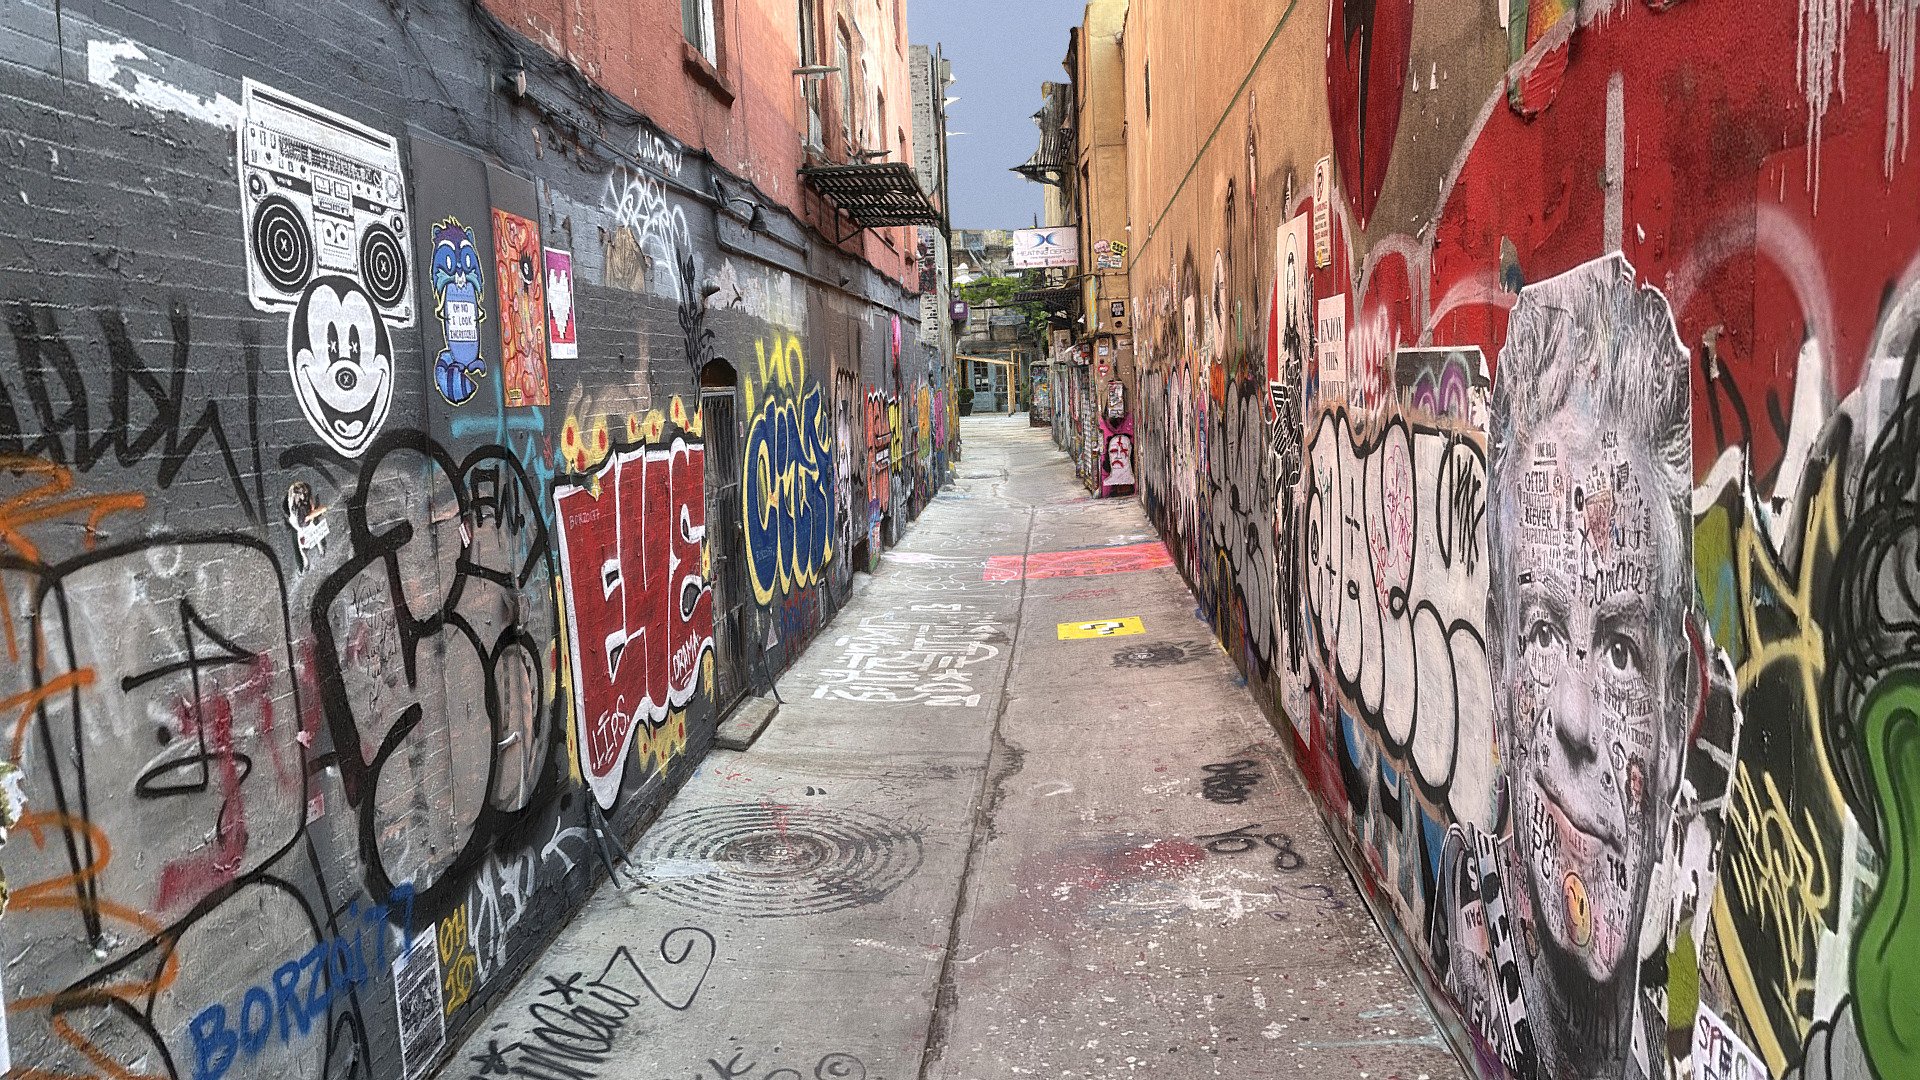 My take on the excellent NYTimes photogrammetry tutorial open dataset
https://rd.nytimes.com/projects/an-end-to-end-guide-to-photogrammetry-with-mobile-devices

I highly recommend it! 0727 FREEMAN ALLEY

Created in RealityCapture by Capturing Reality - photogrammetry  (1200x12mp), 3x8k textures - Freeman Alley Dataset - Download Free 3D model by matousekfoto 3d model